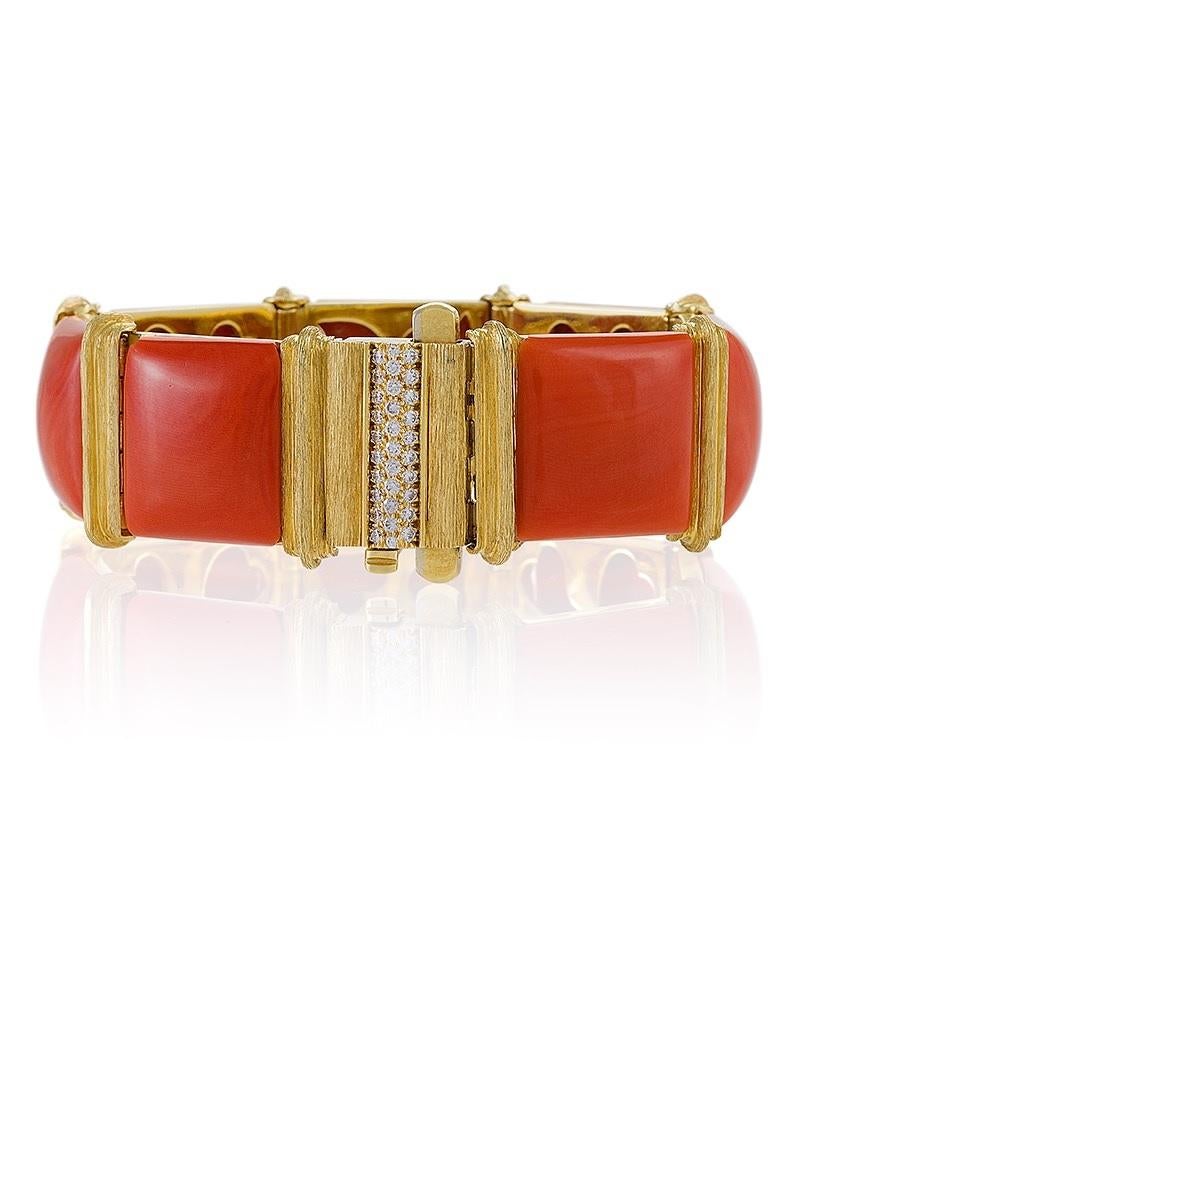 This striking contemporary coral and gold bracelet by Henry Dunay possesses all the stately glamour of a Gilded Age gem. Seven impressively large and perfectly-matched coral cabochon tablets are linked with ridged gold bars, etched with Dunay’s